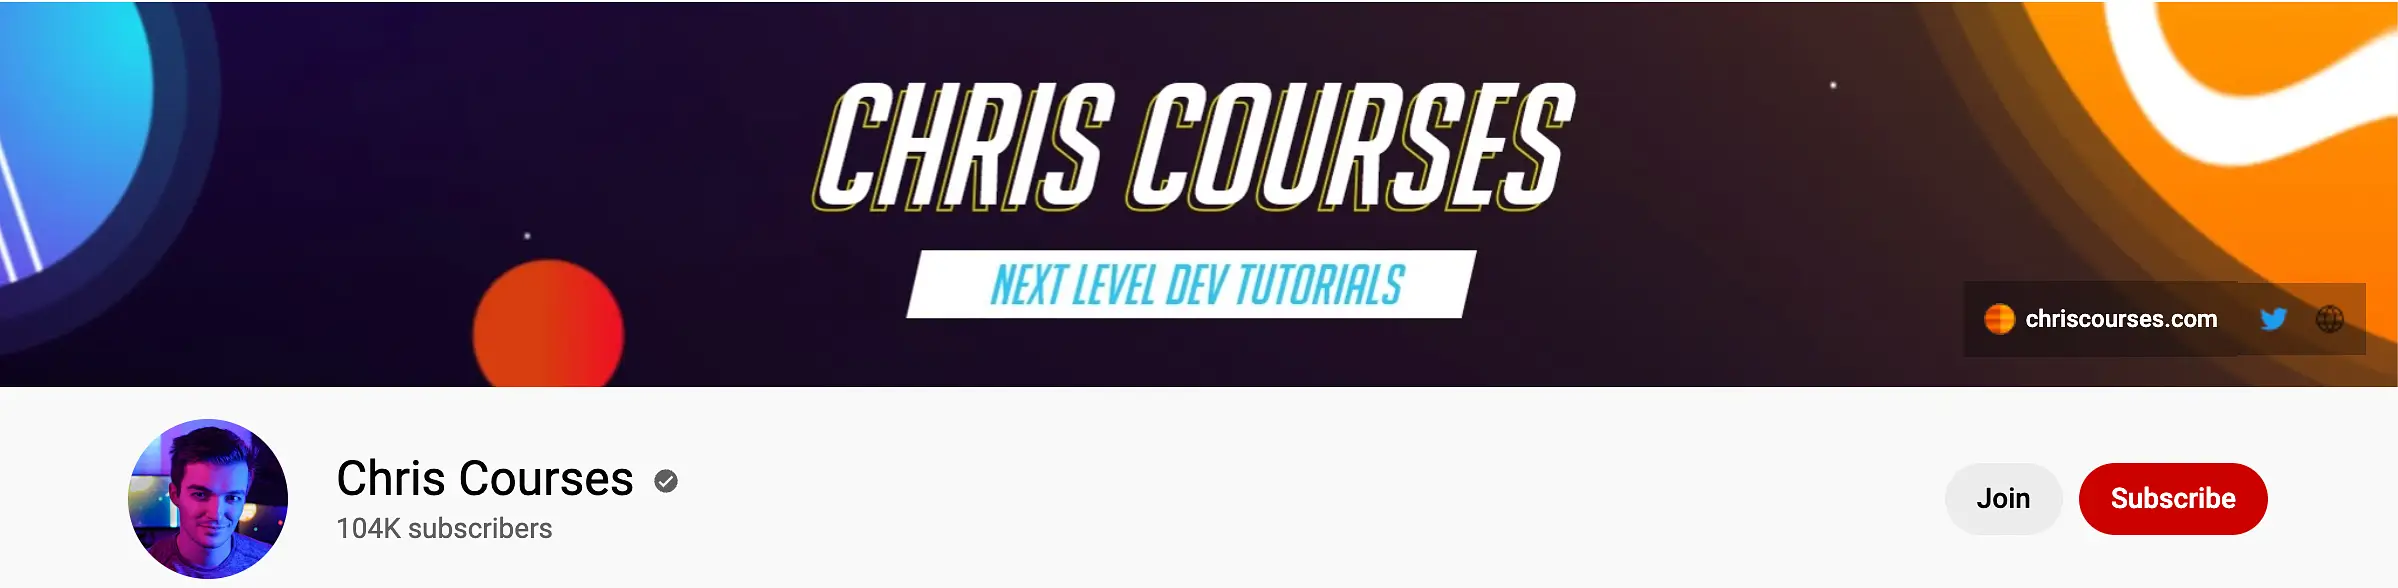 Chris Courses Youtube Channel